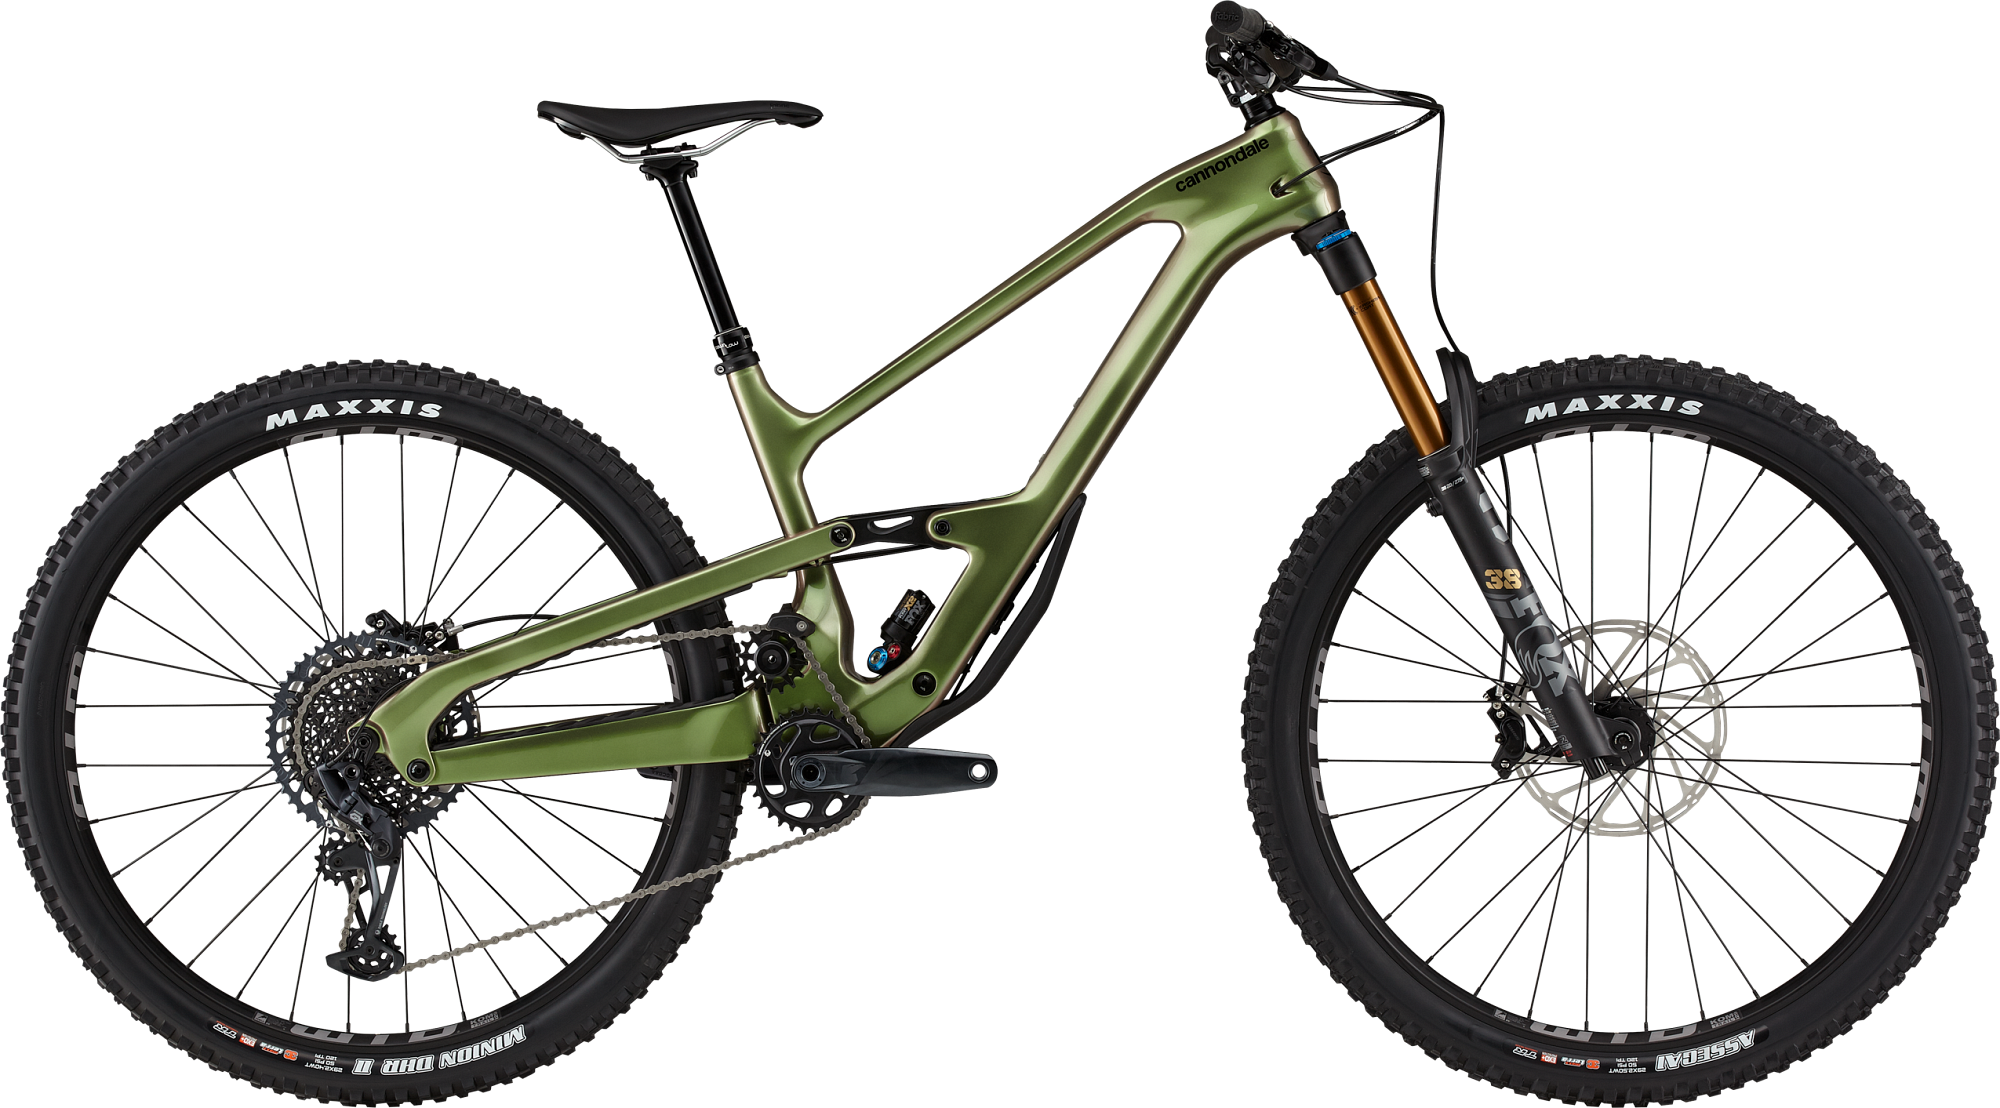 Grens grind Hobart All New Jekyll 2 | Full Suspension Trail Mountain Bike | Cannondale